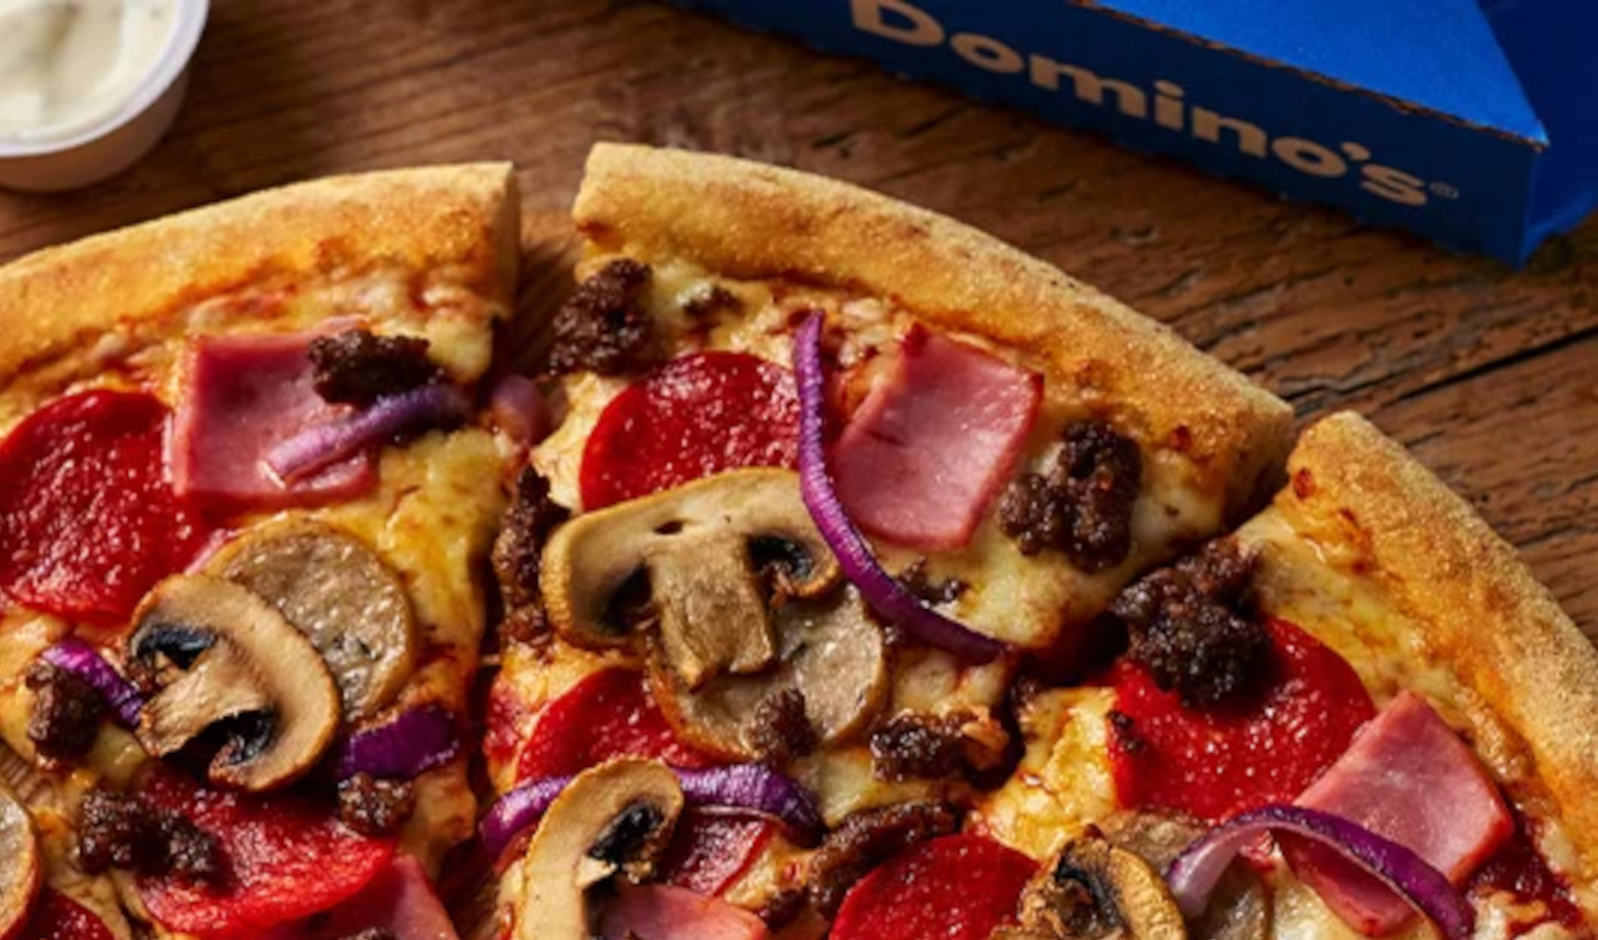 100% Cashback up to £15 at Domino's